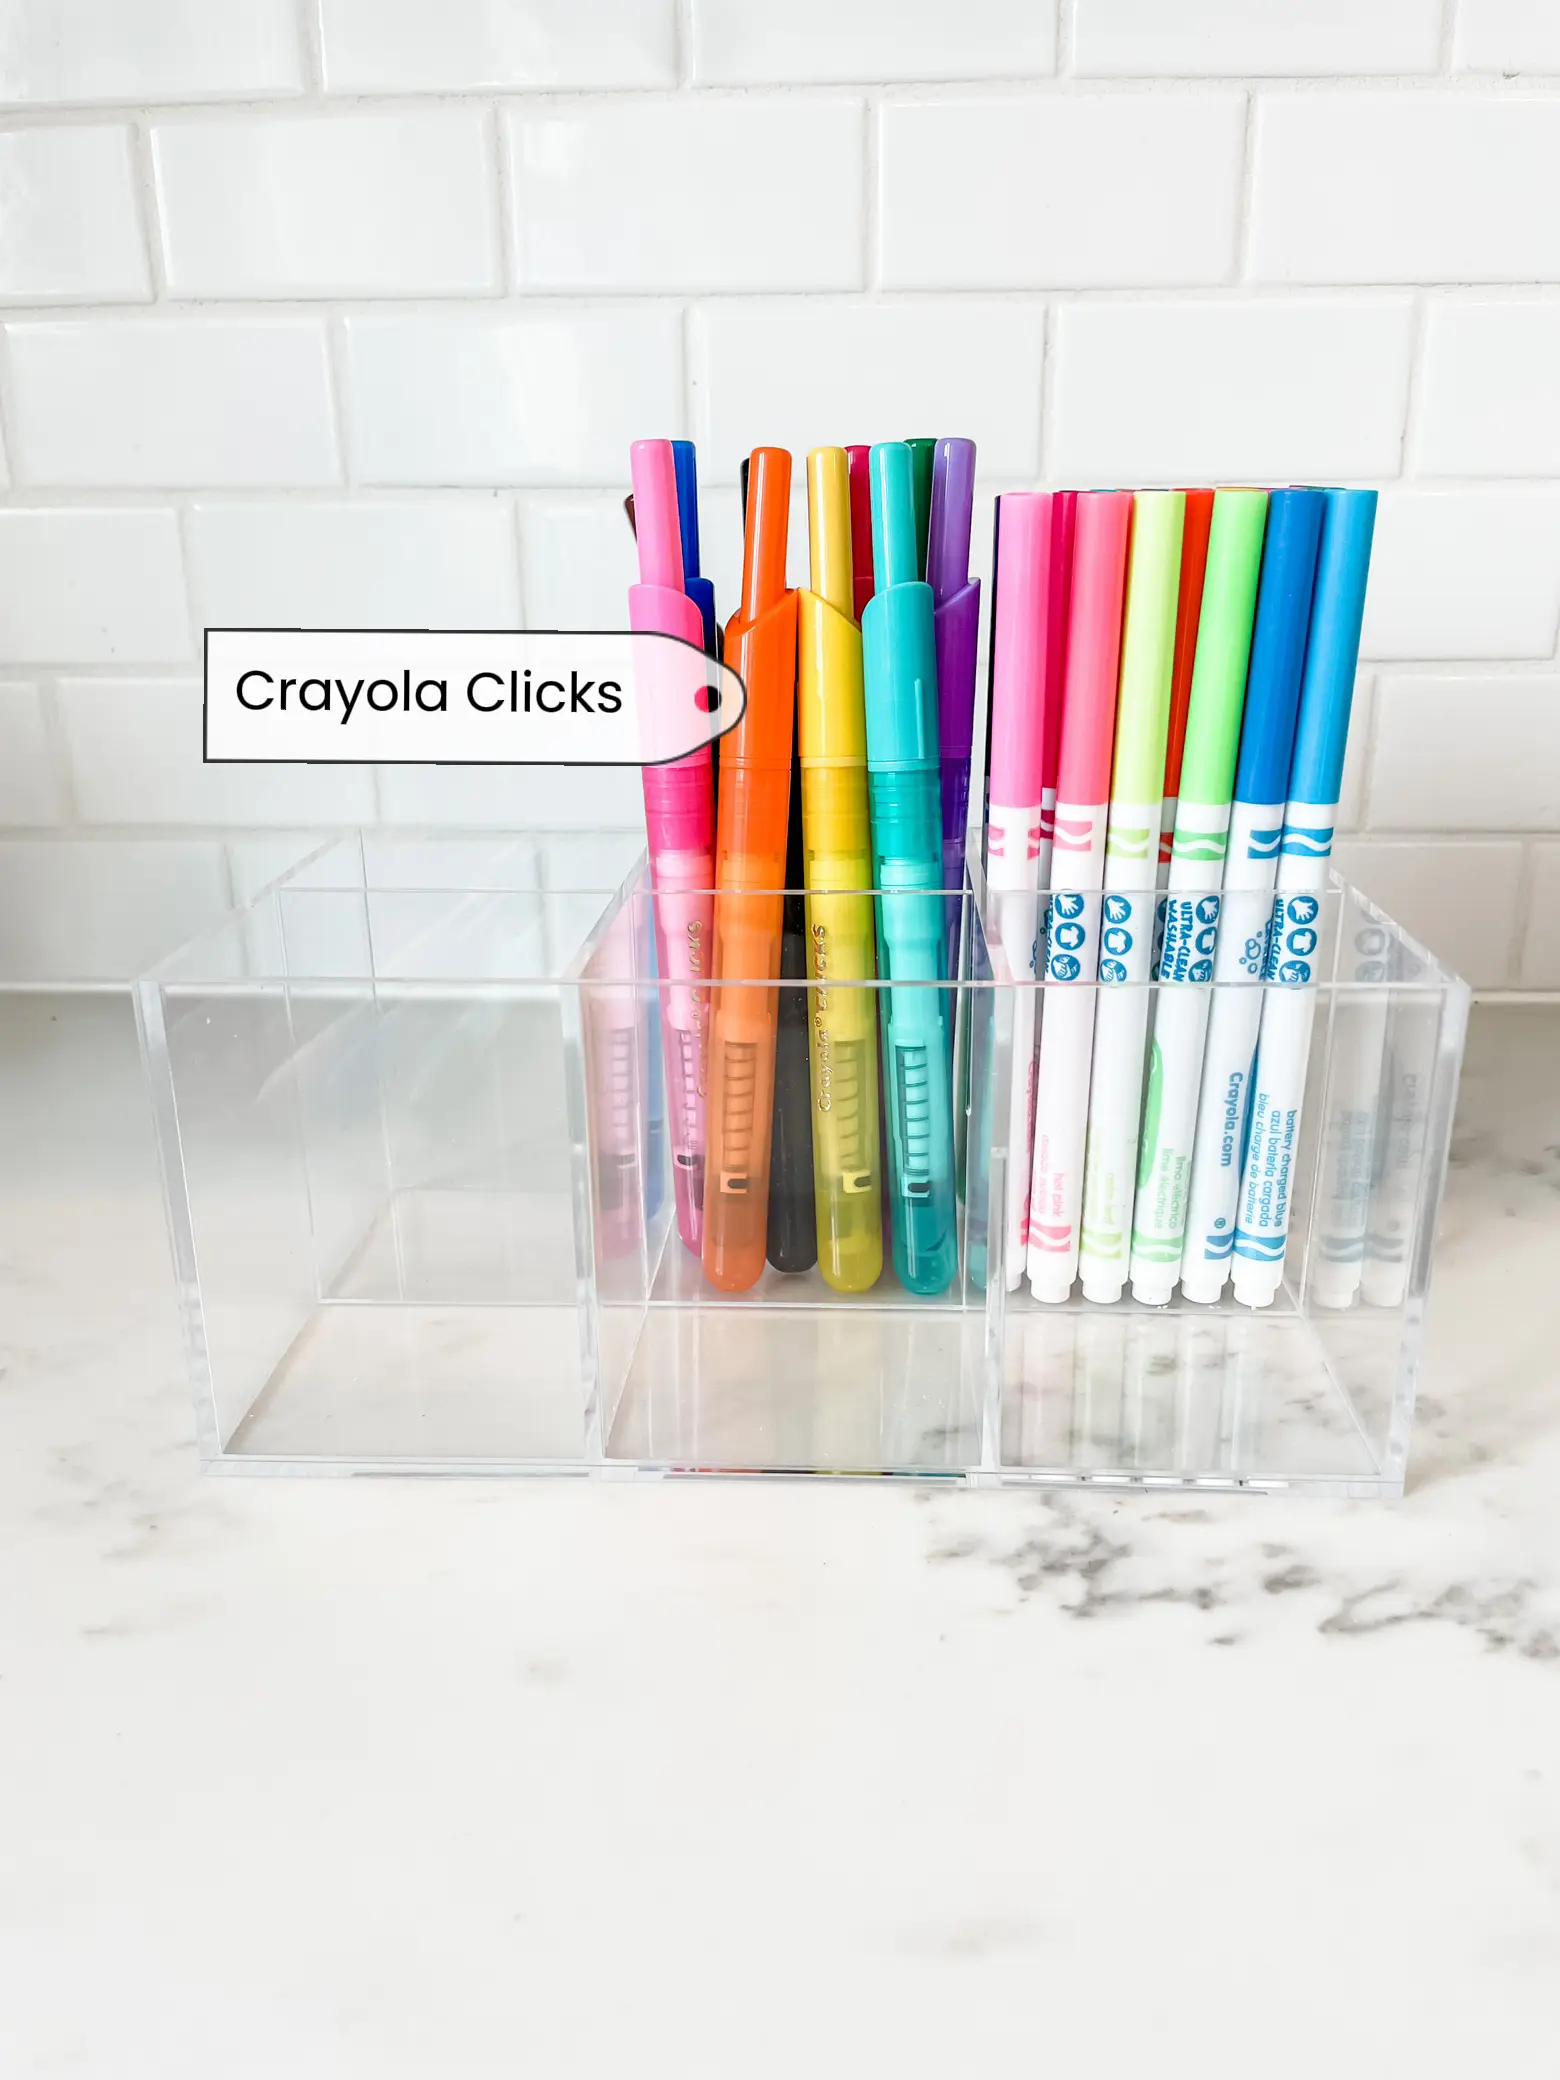 Find the Best Crayola 10 Color Clicks Washable Markers 135 in Store